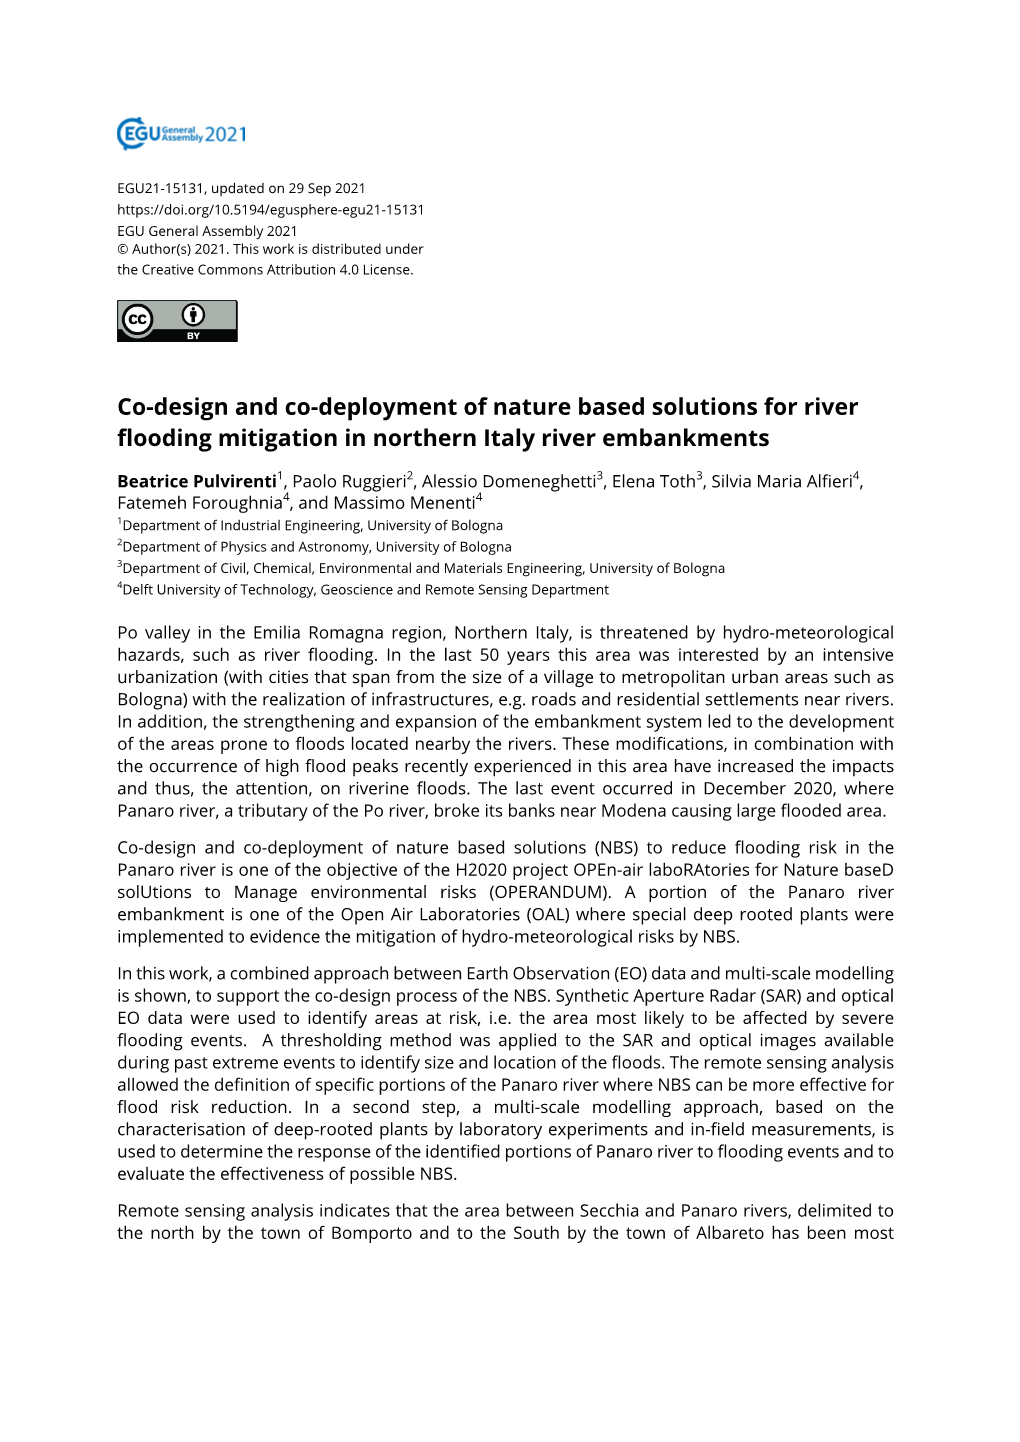 Co-Design and Co-Deployment of Nature Based Solutions for River Flooding Mitigation in Northern Italy River Embankments